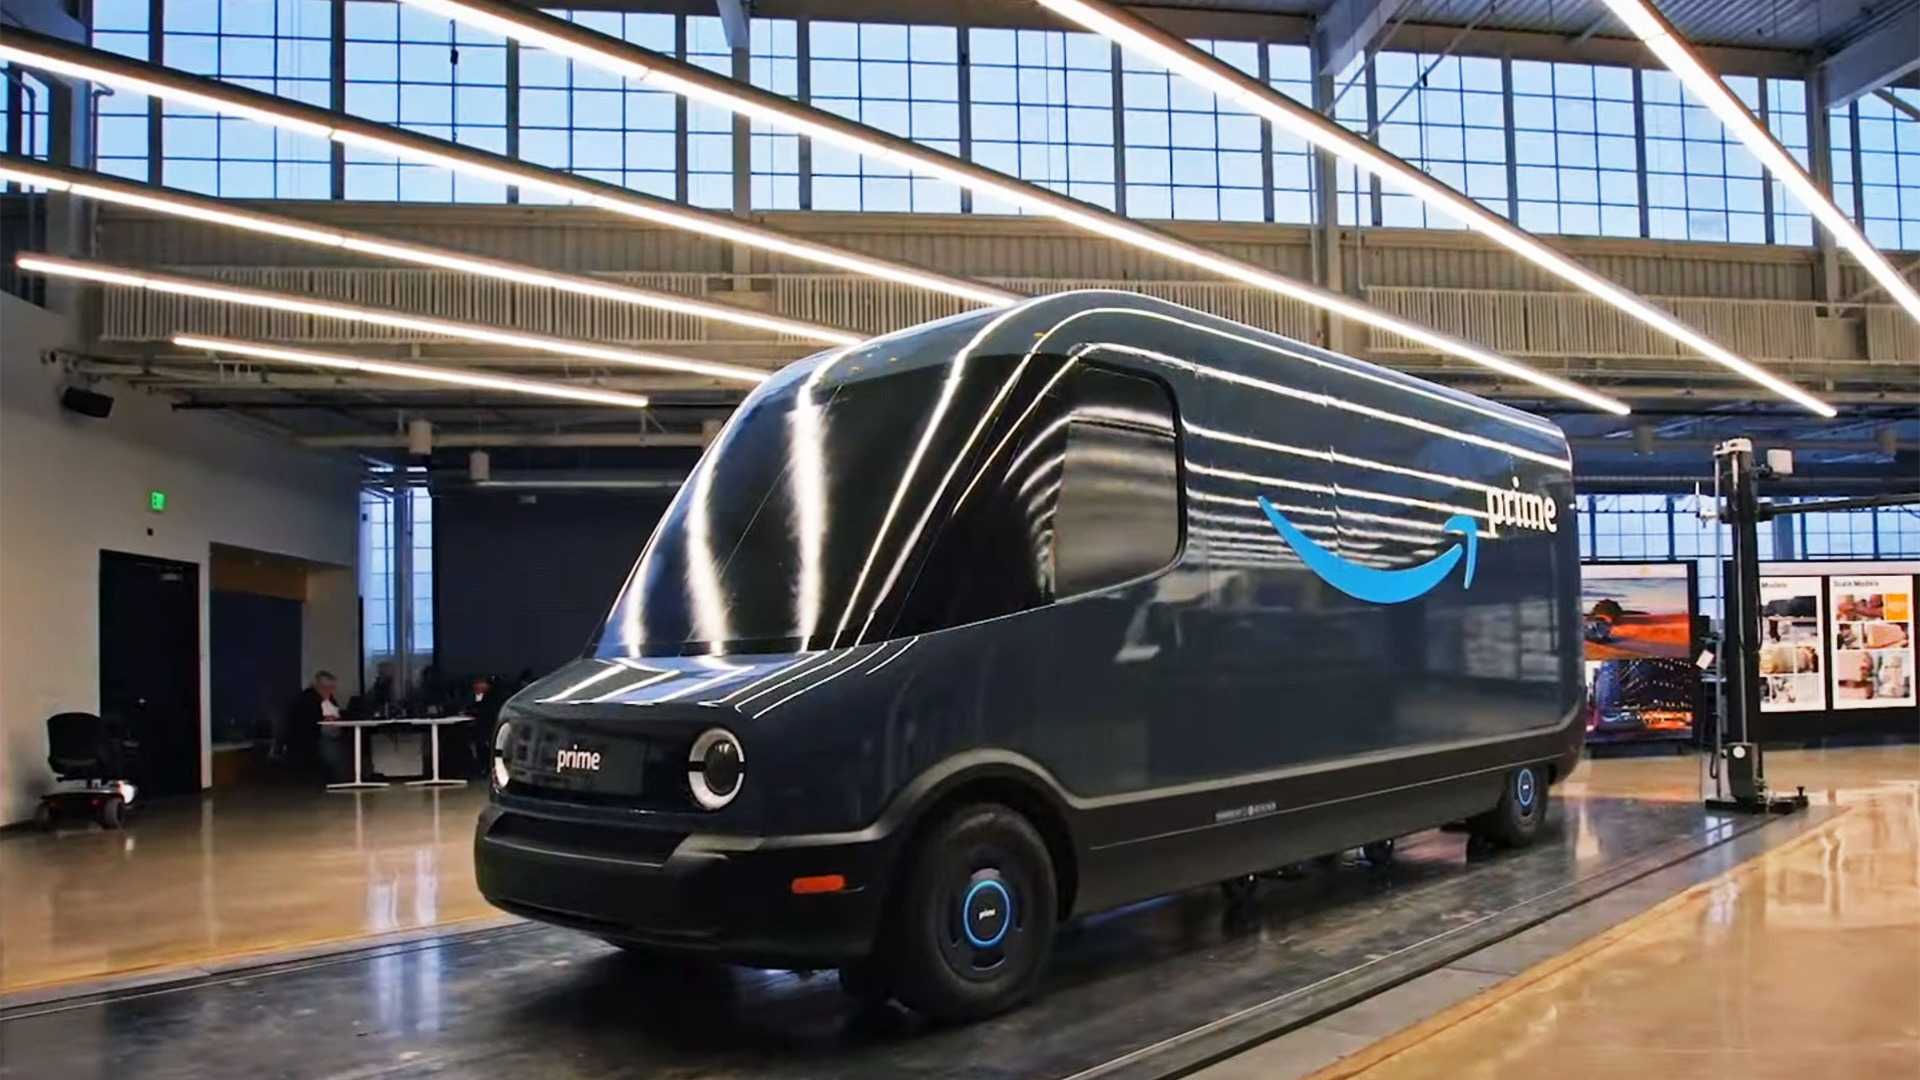 New Data and Images of the Electric Delivery Van Rivian is Developing